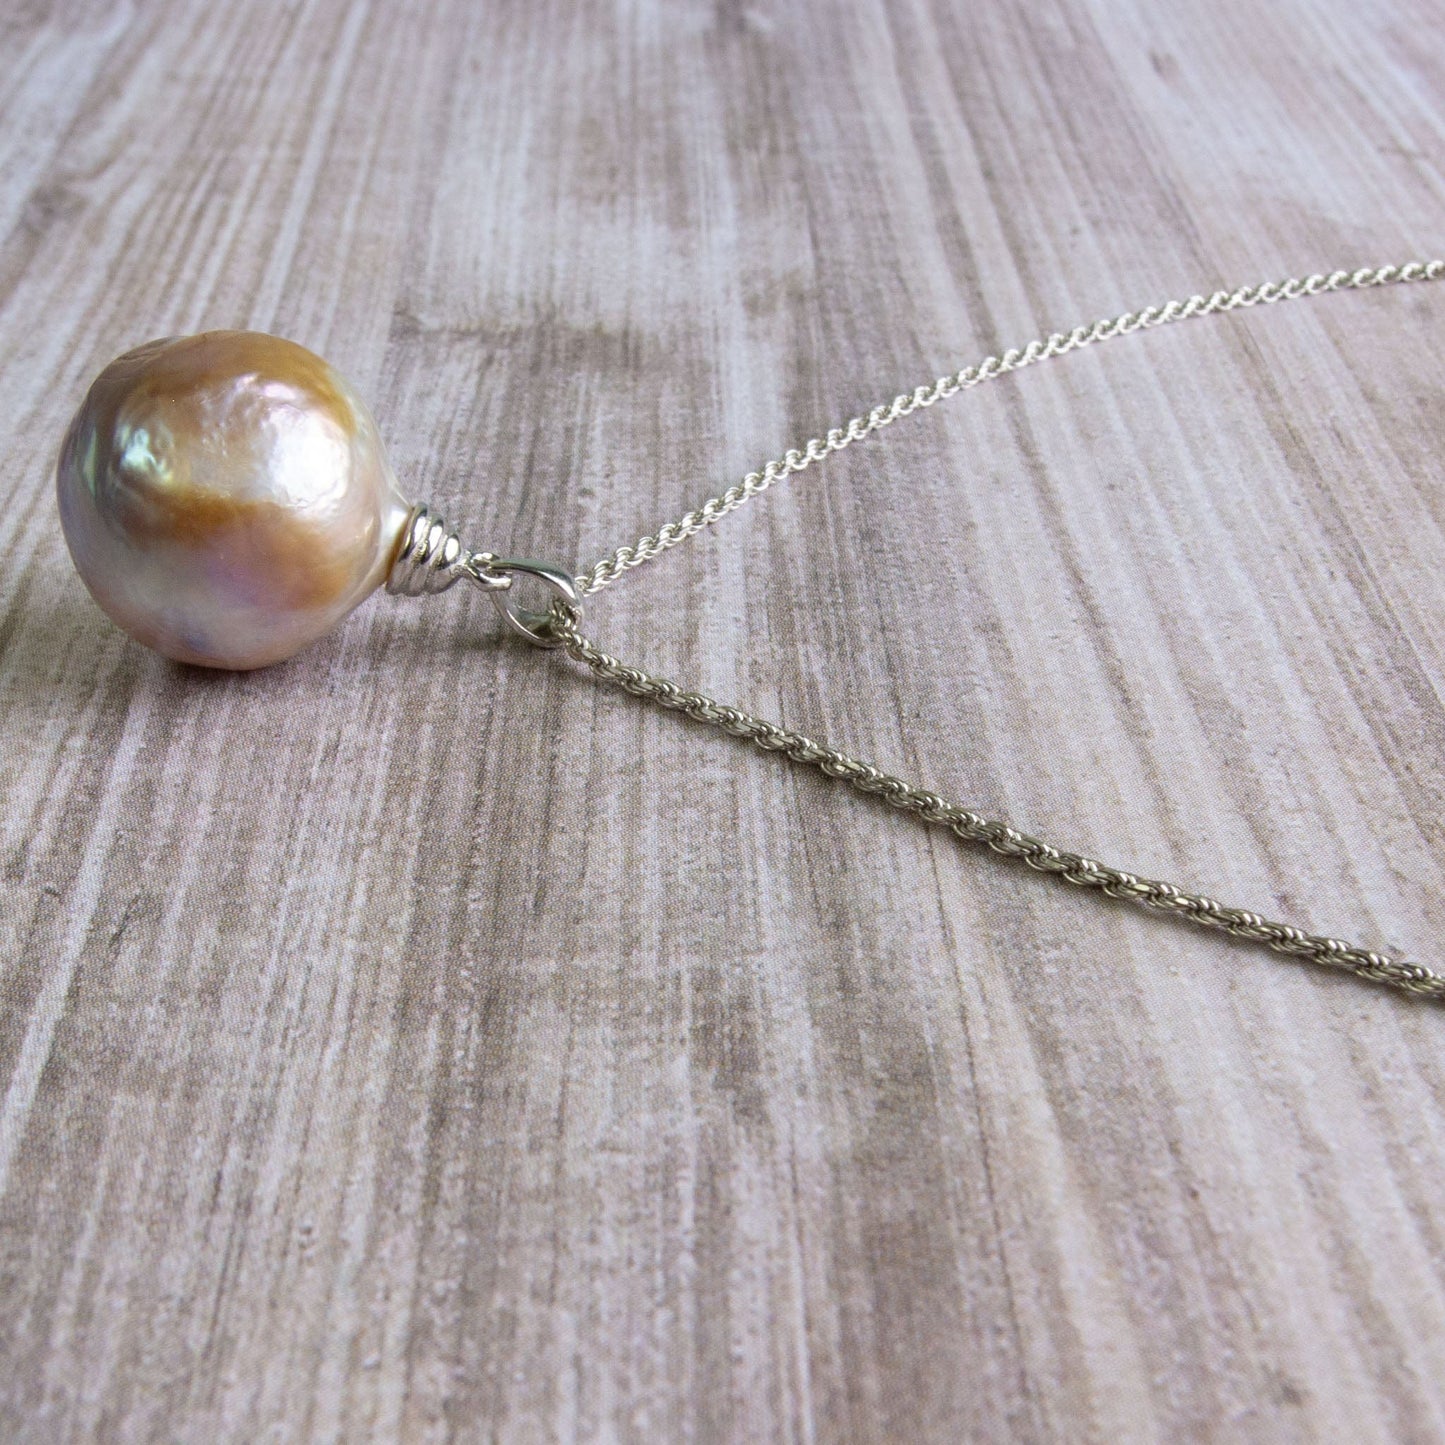 Arbor Trading Post Necklaces Handcrafted Pink Freshwater Baroque Pearl Necklace, Adjustable 18" Chain, Gold or Silver